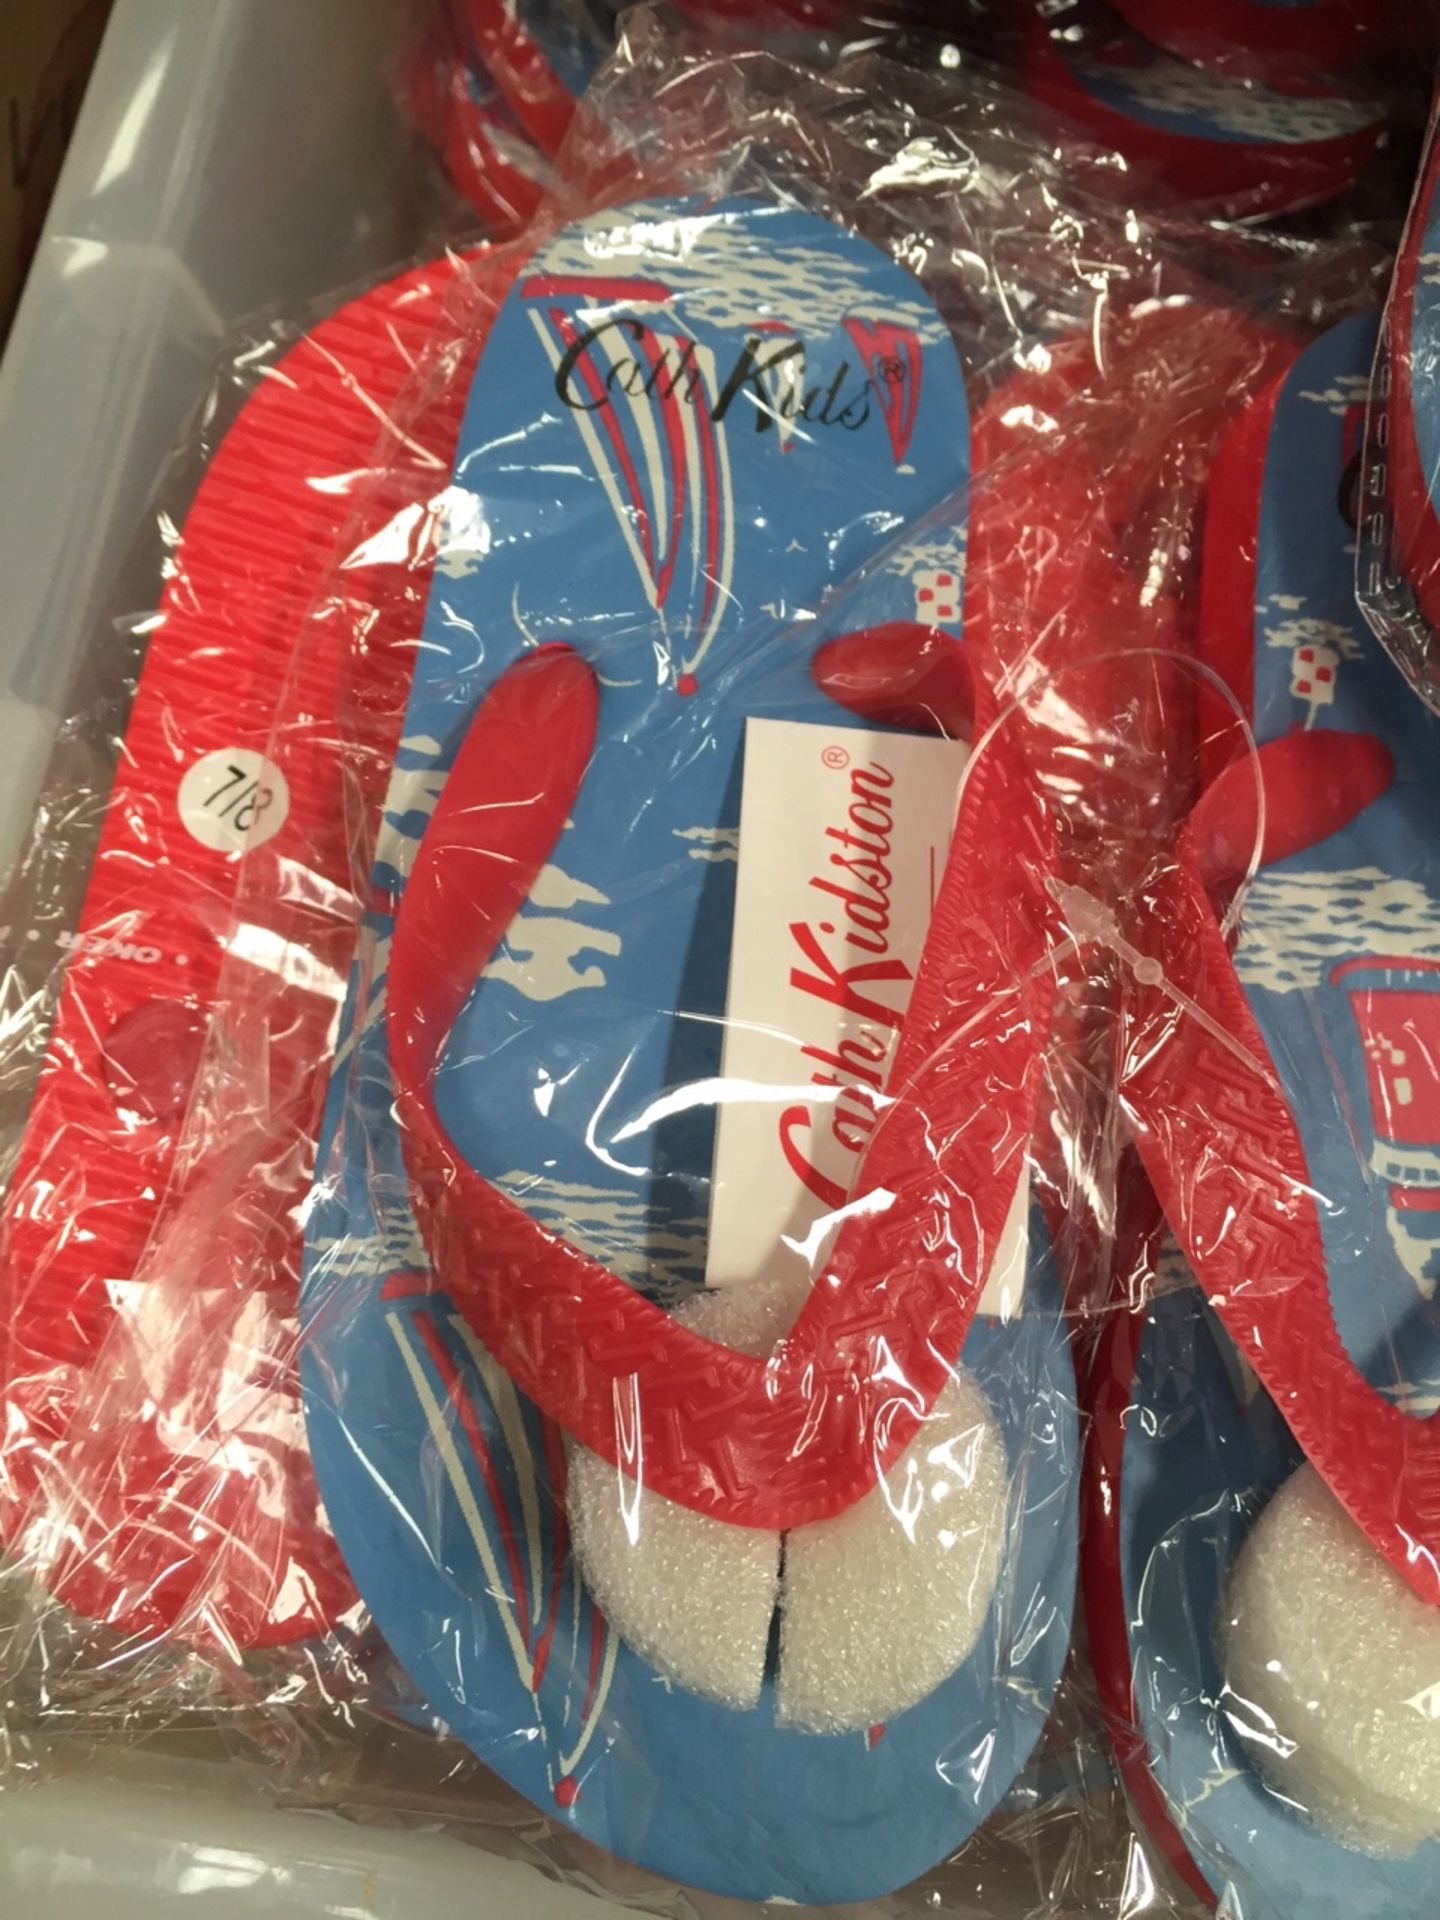 100 x Pairs of Original Cath Kidston of London Boys Flip Flop Beach Sandals - Brand New Stock - - Image 3 of 3